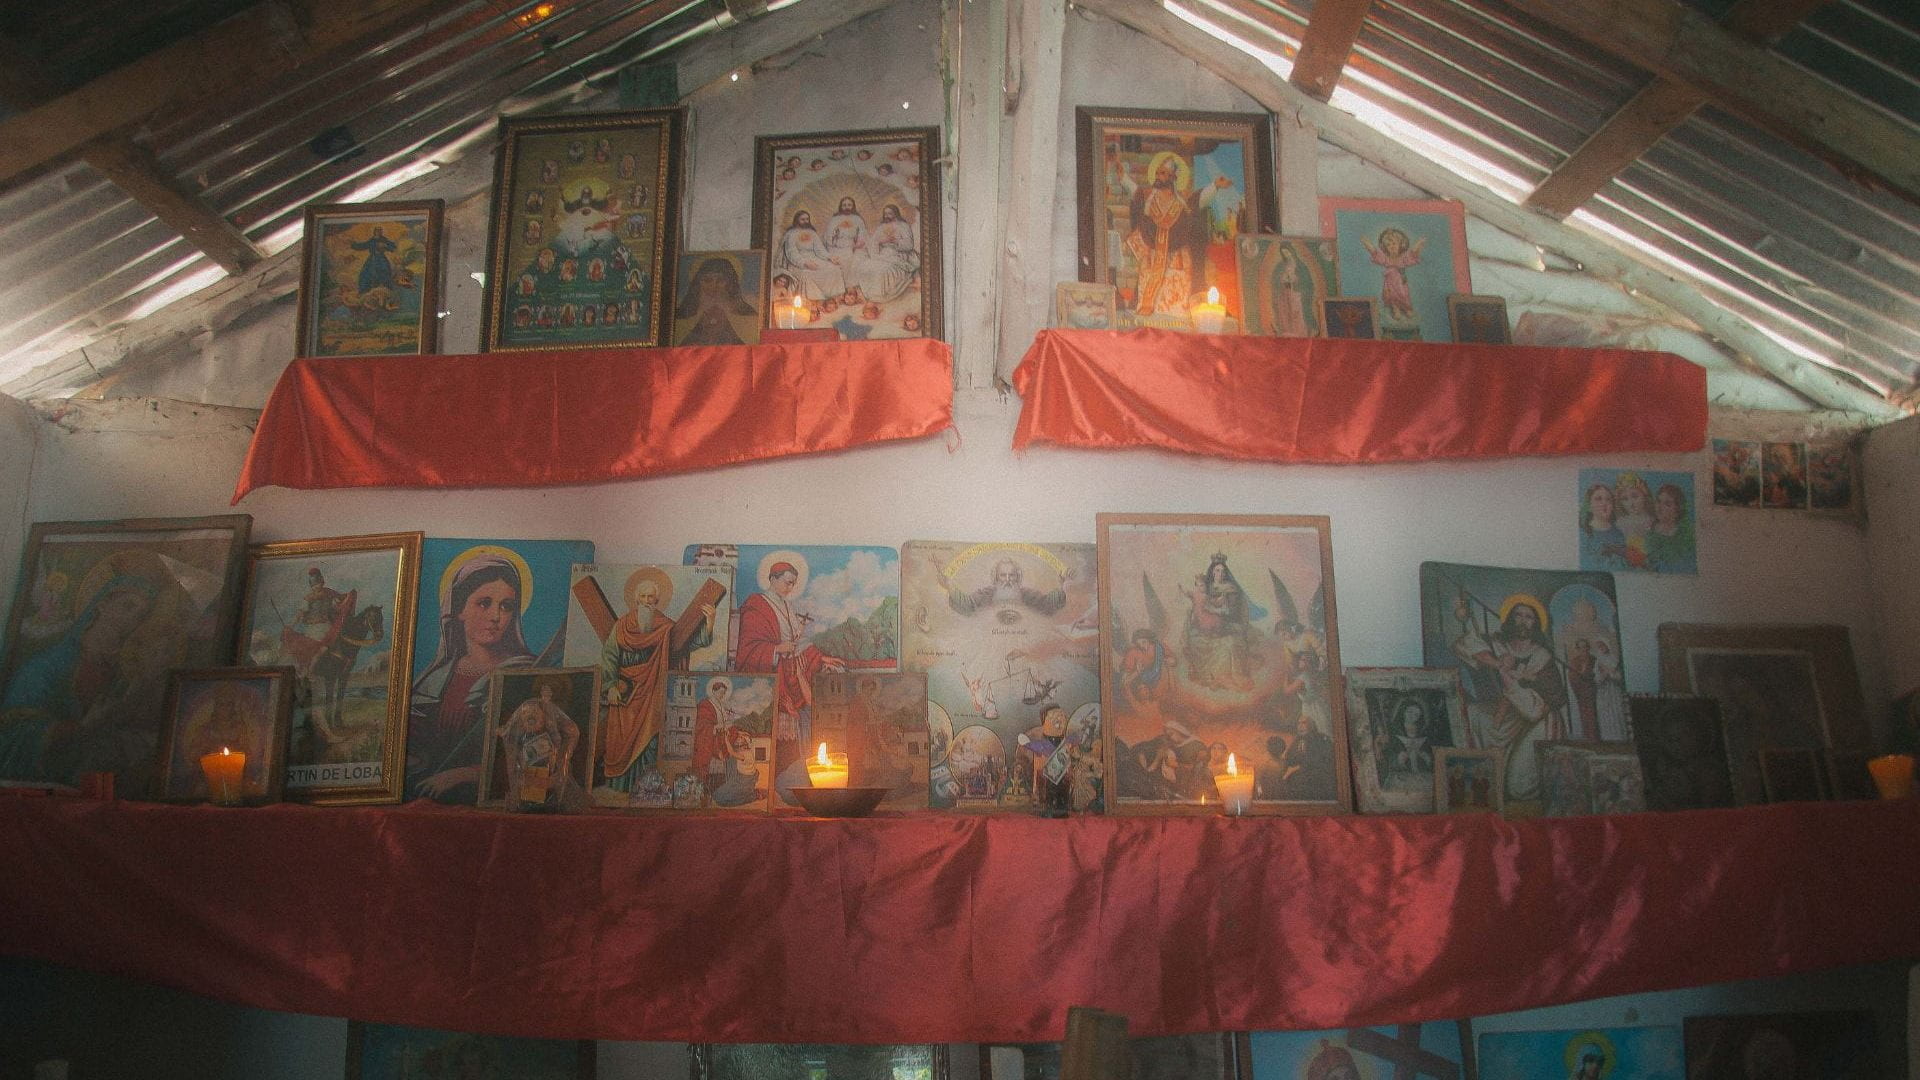 An elaborate altar contains various framed images, candles, and silky red fabric.